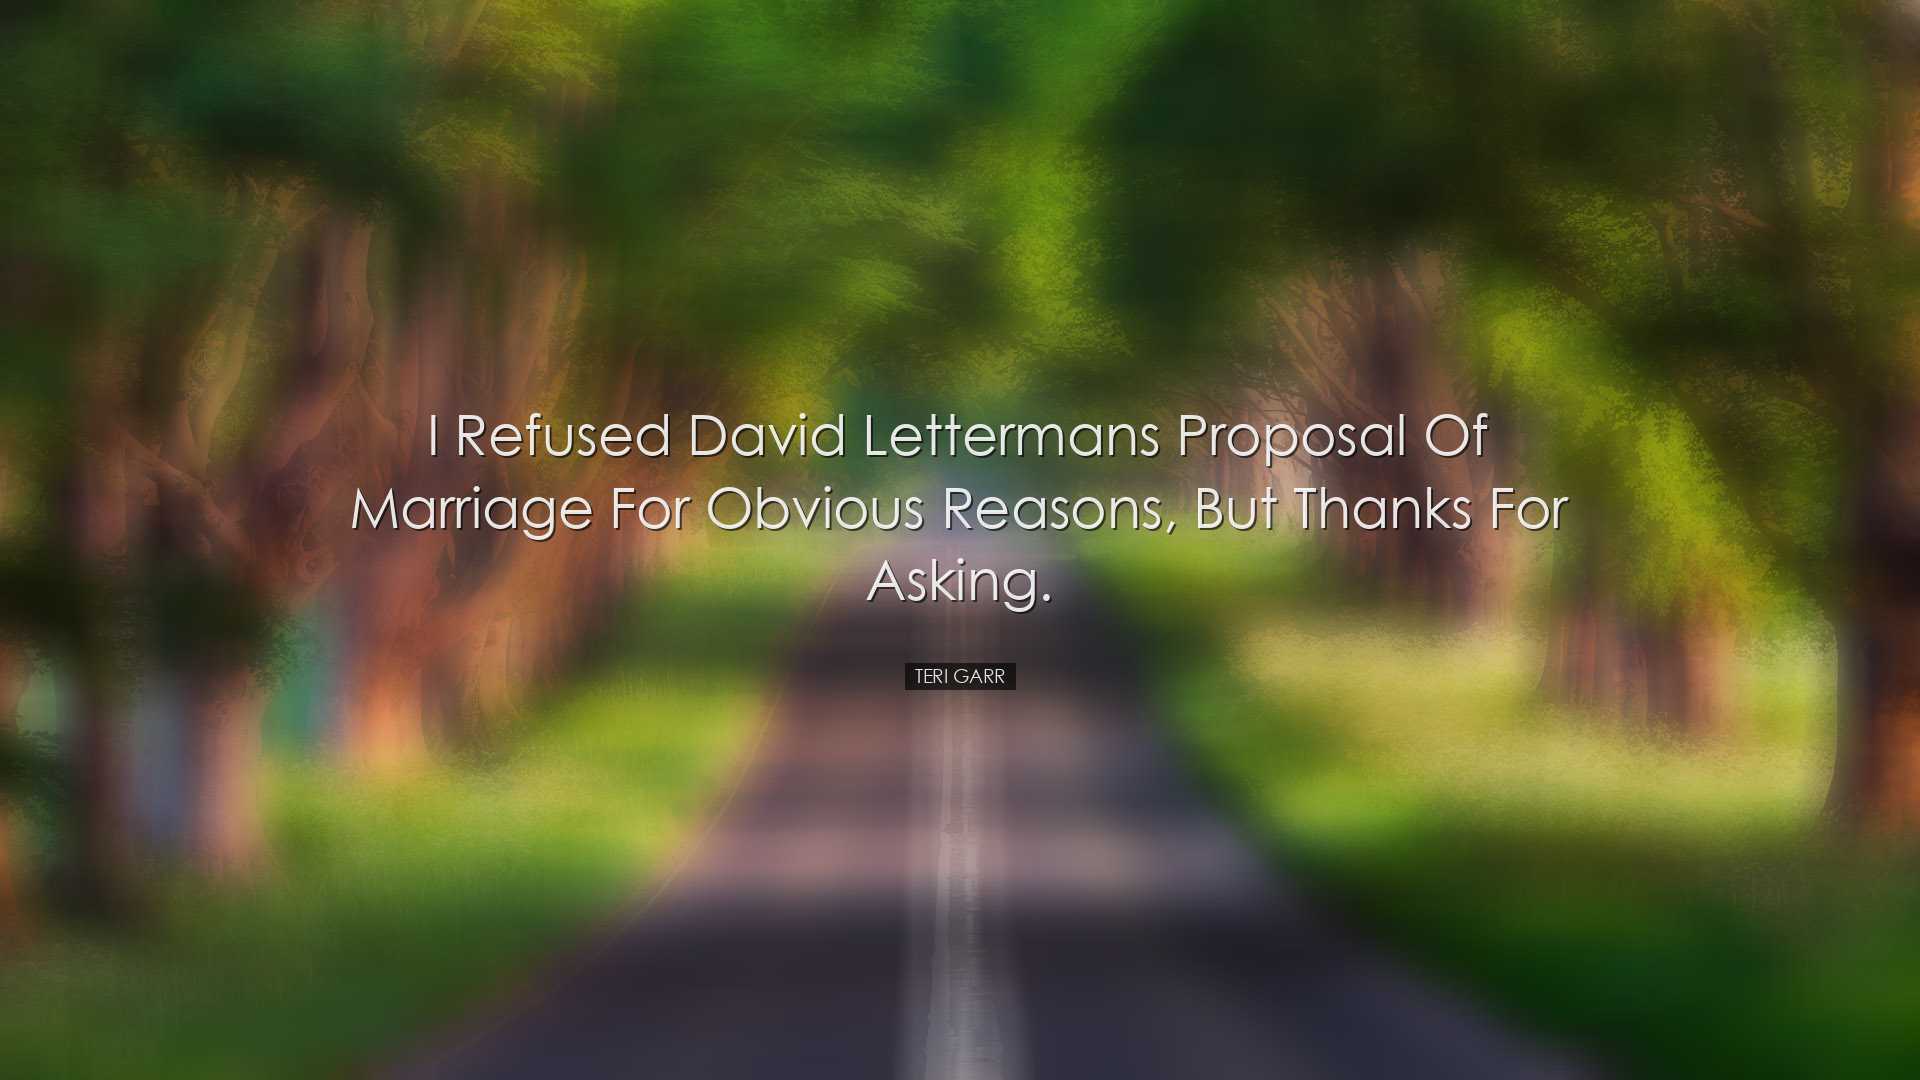 I refused David Lettermans proposal of marriage for obvious reason